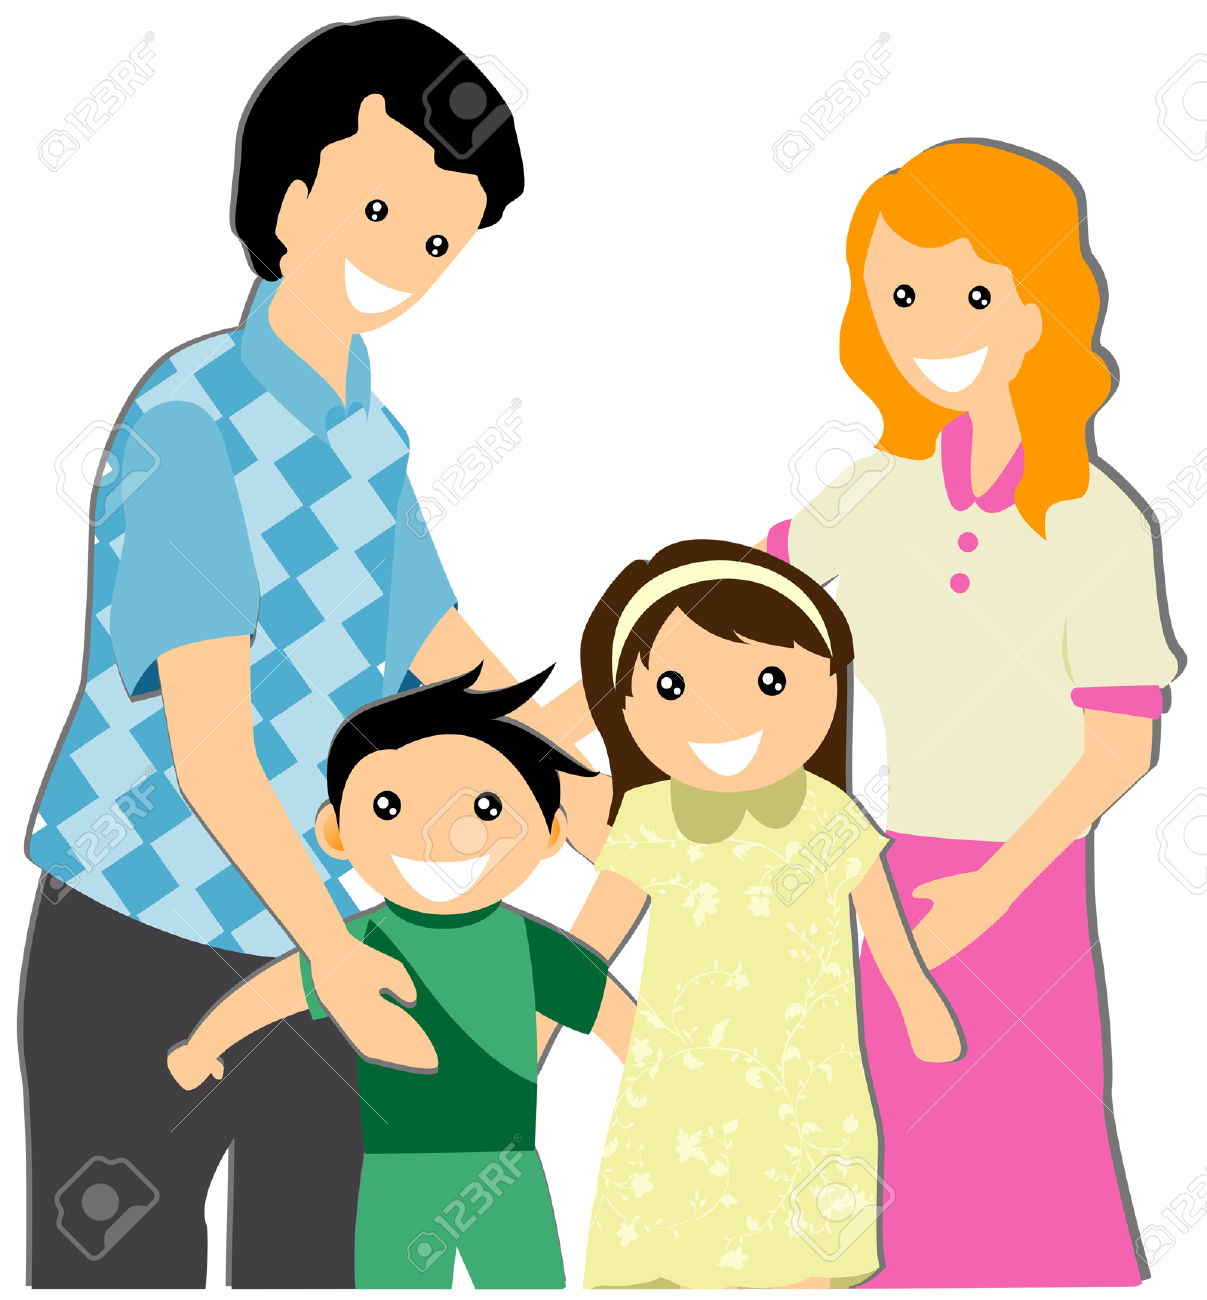 My family illustration royalty free cliparts vectors and stock